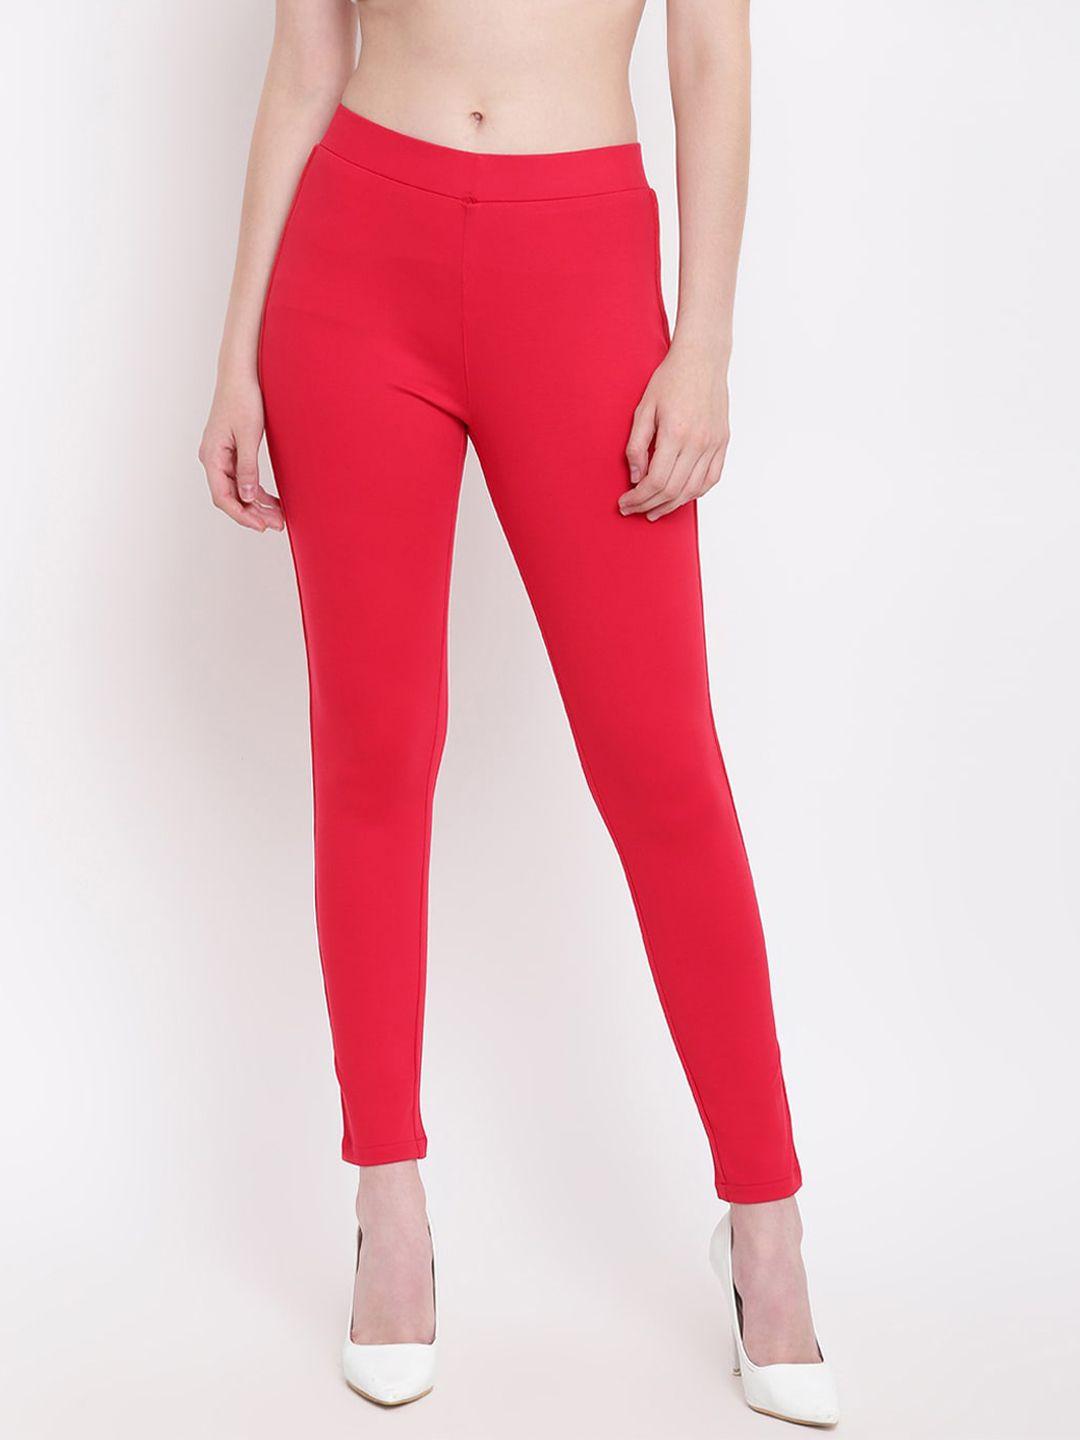 be-indi-women-red-slim-fit-jeggings